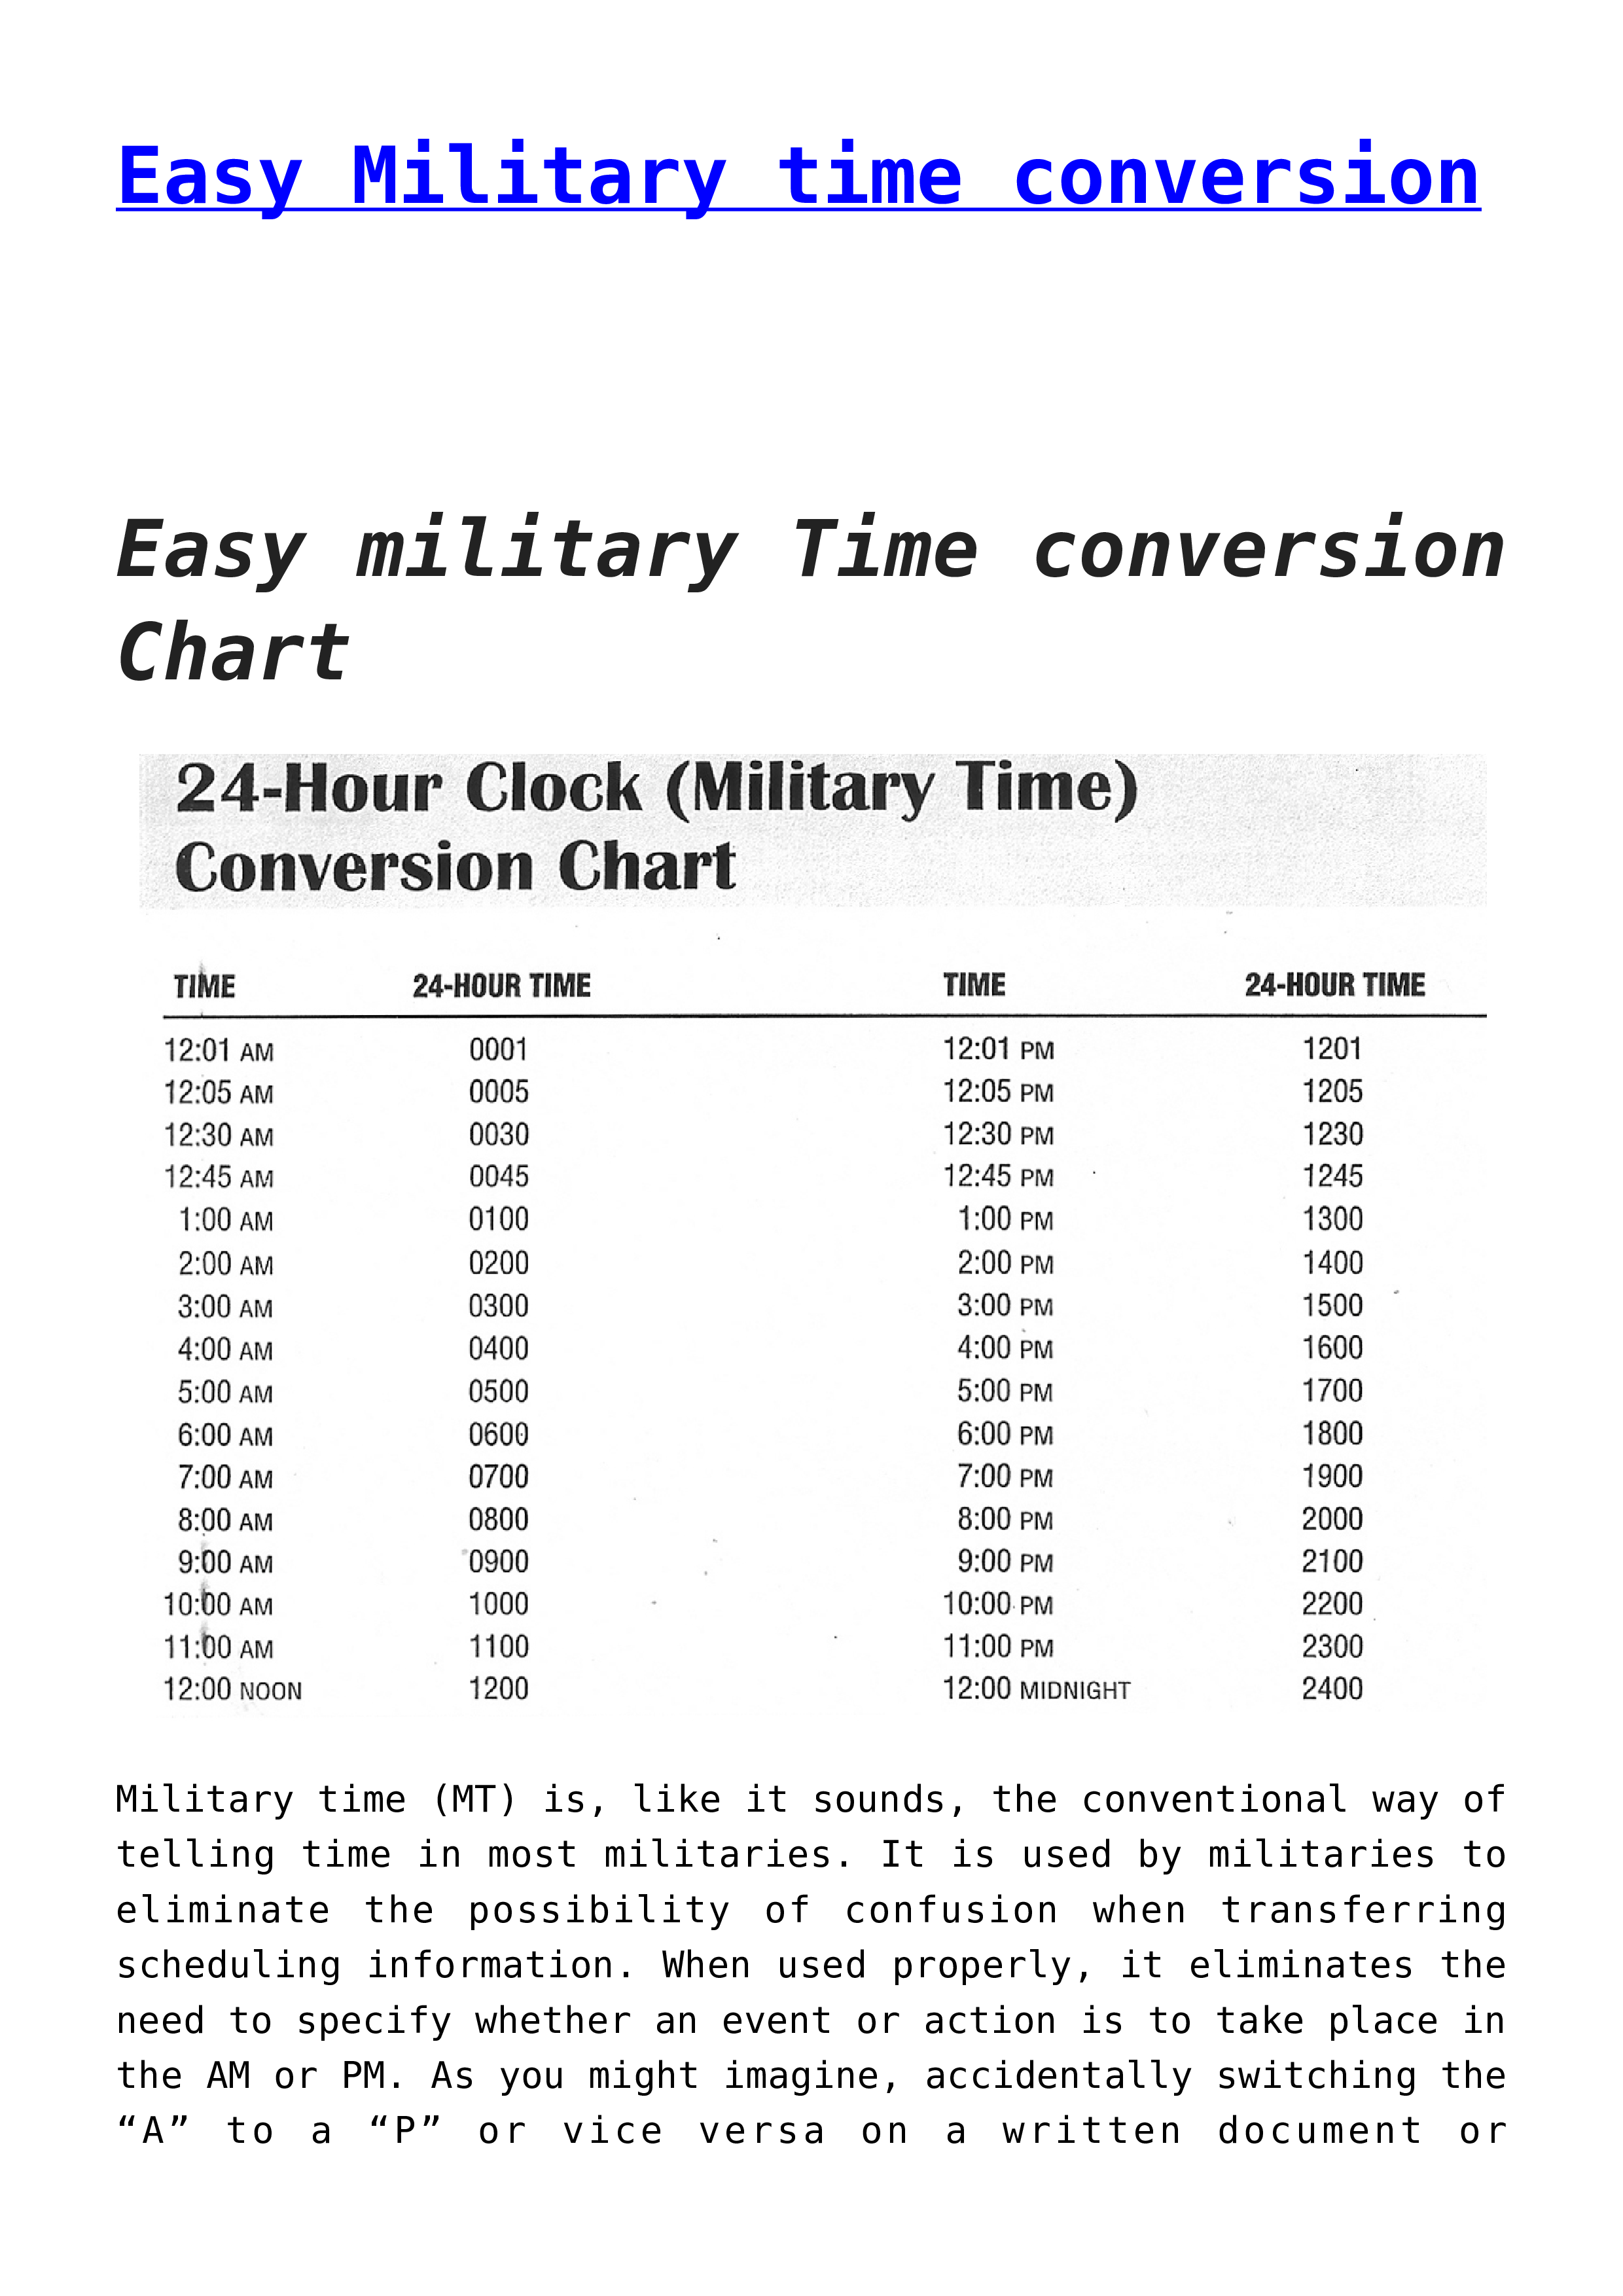 Easy Military Time Conversion Chart main image